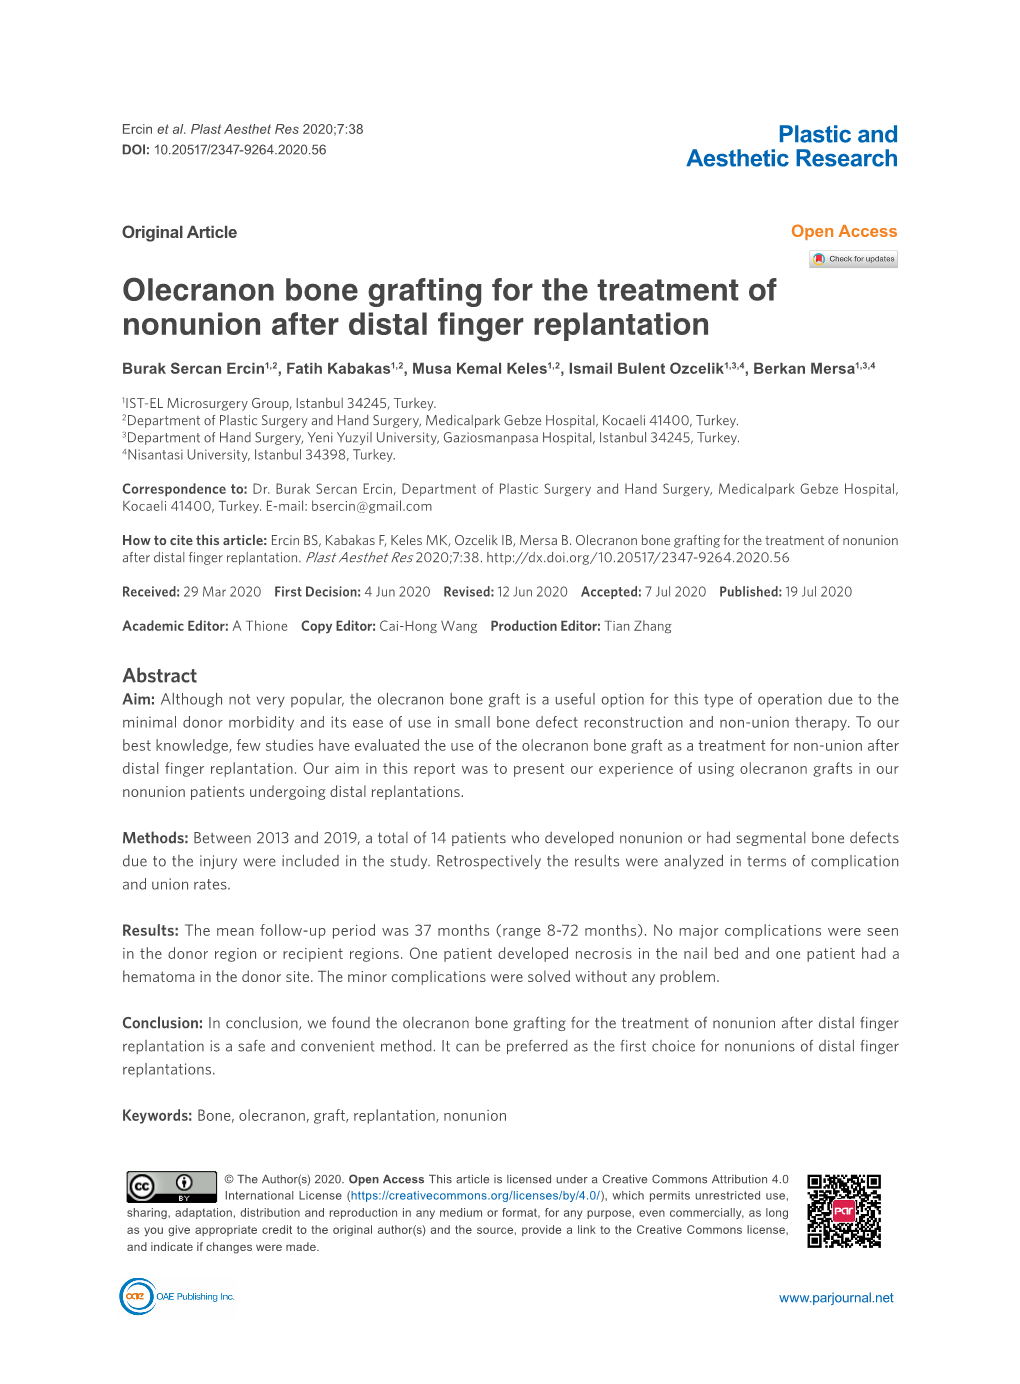 Olecranon Bone Grafting for the Treatment of Nonunion After Distal Finger Replantation